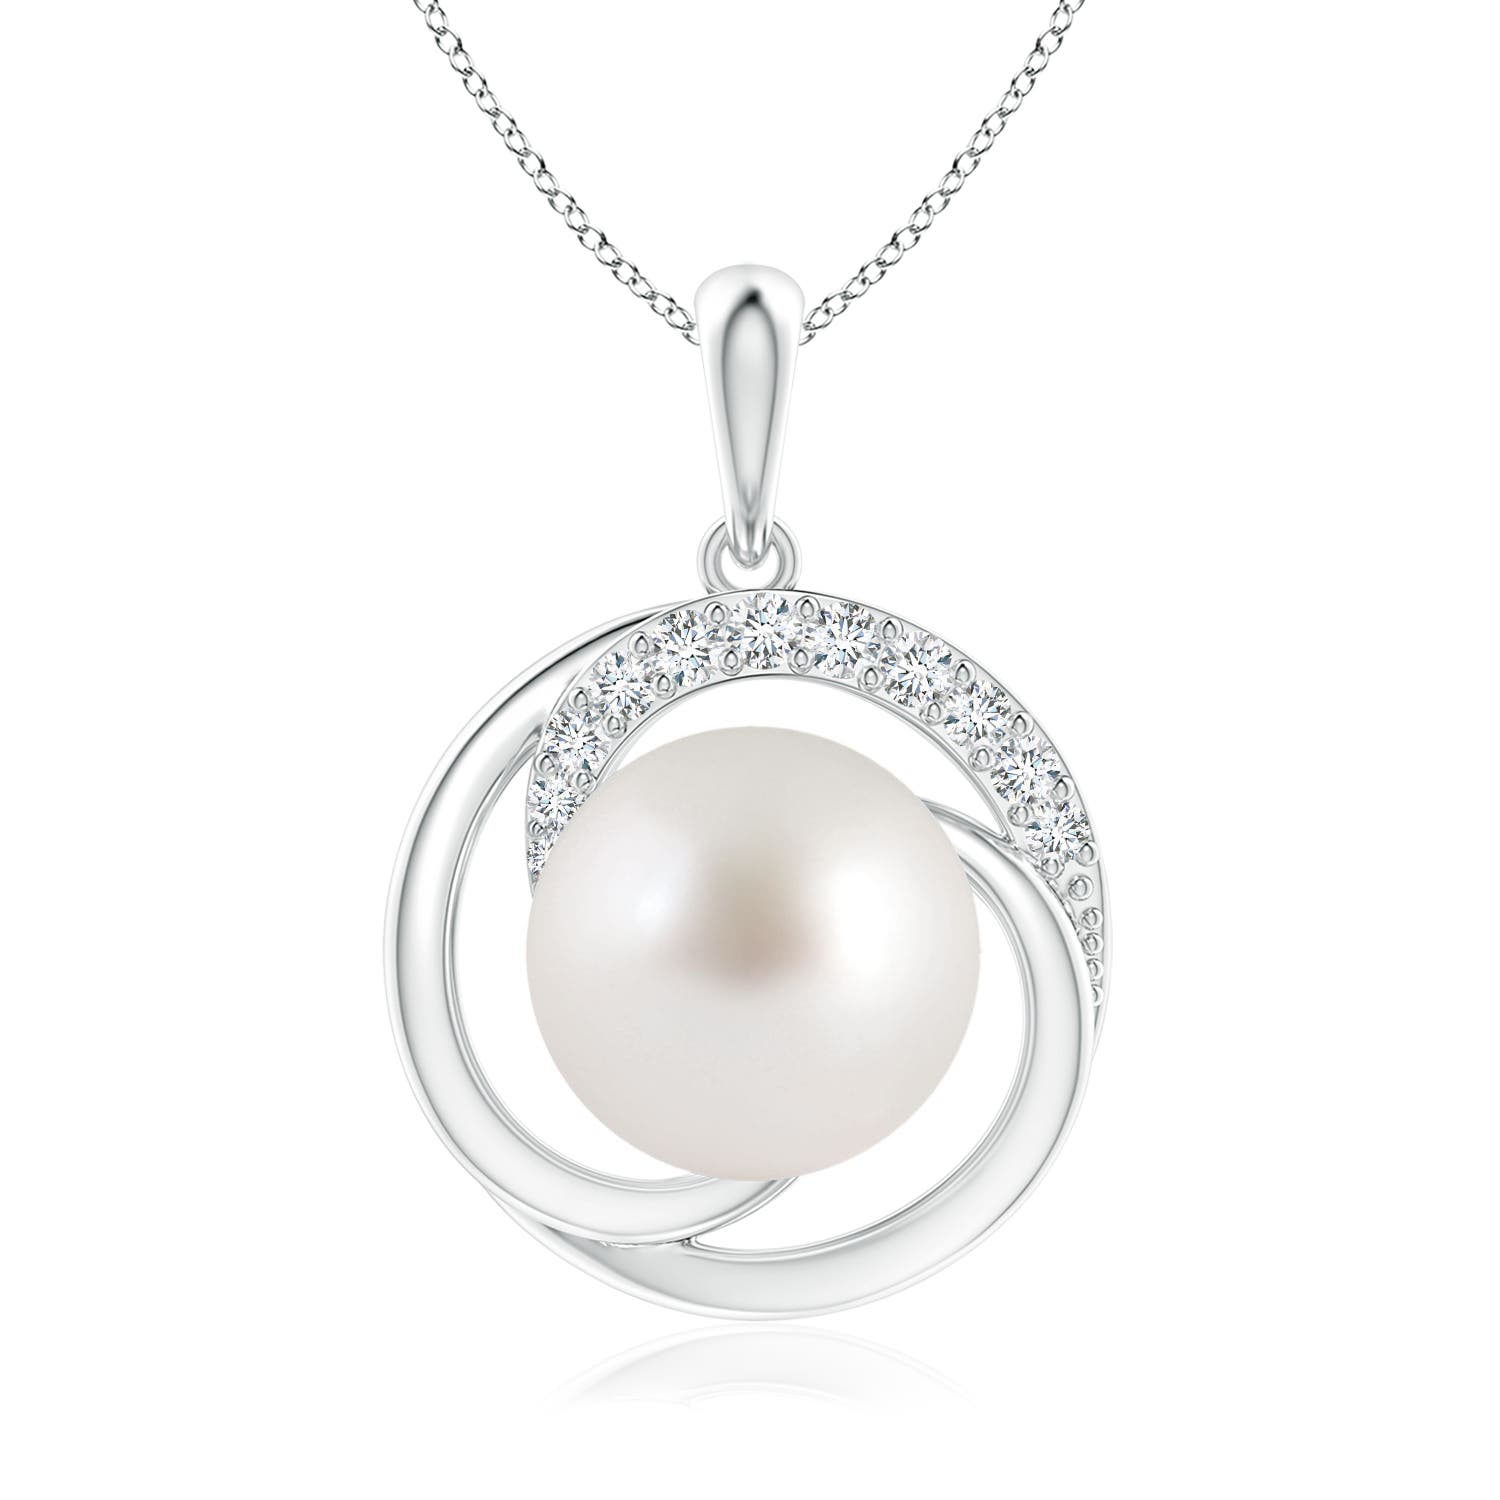 AAA - South Sea Cultured Pearl / 7.33 CT / 14 KT White Gold